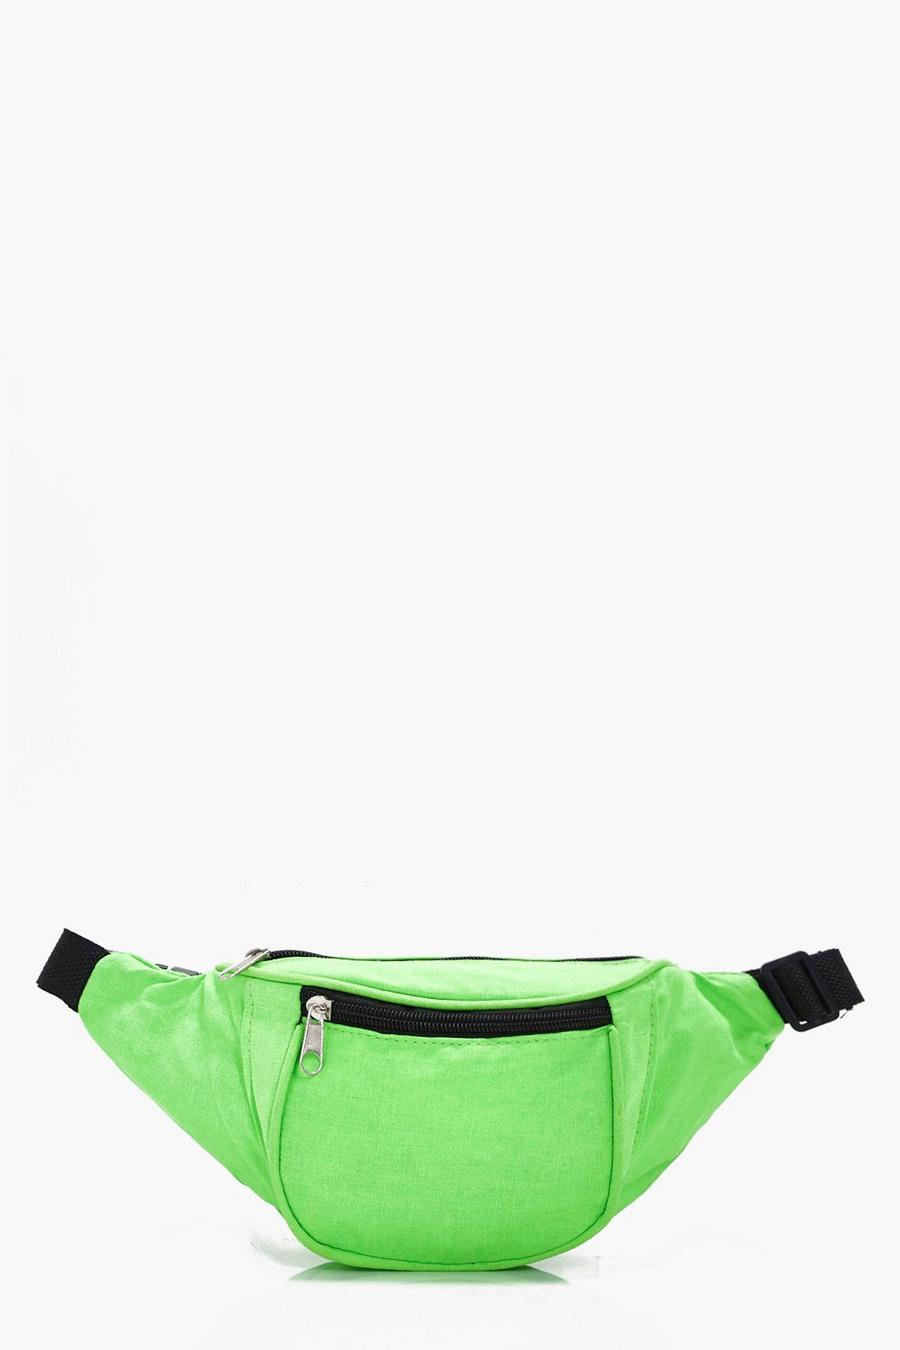 Green Katie Bright Neon Fanny Pack image number 1